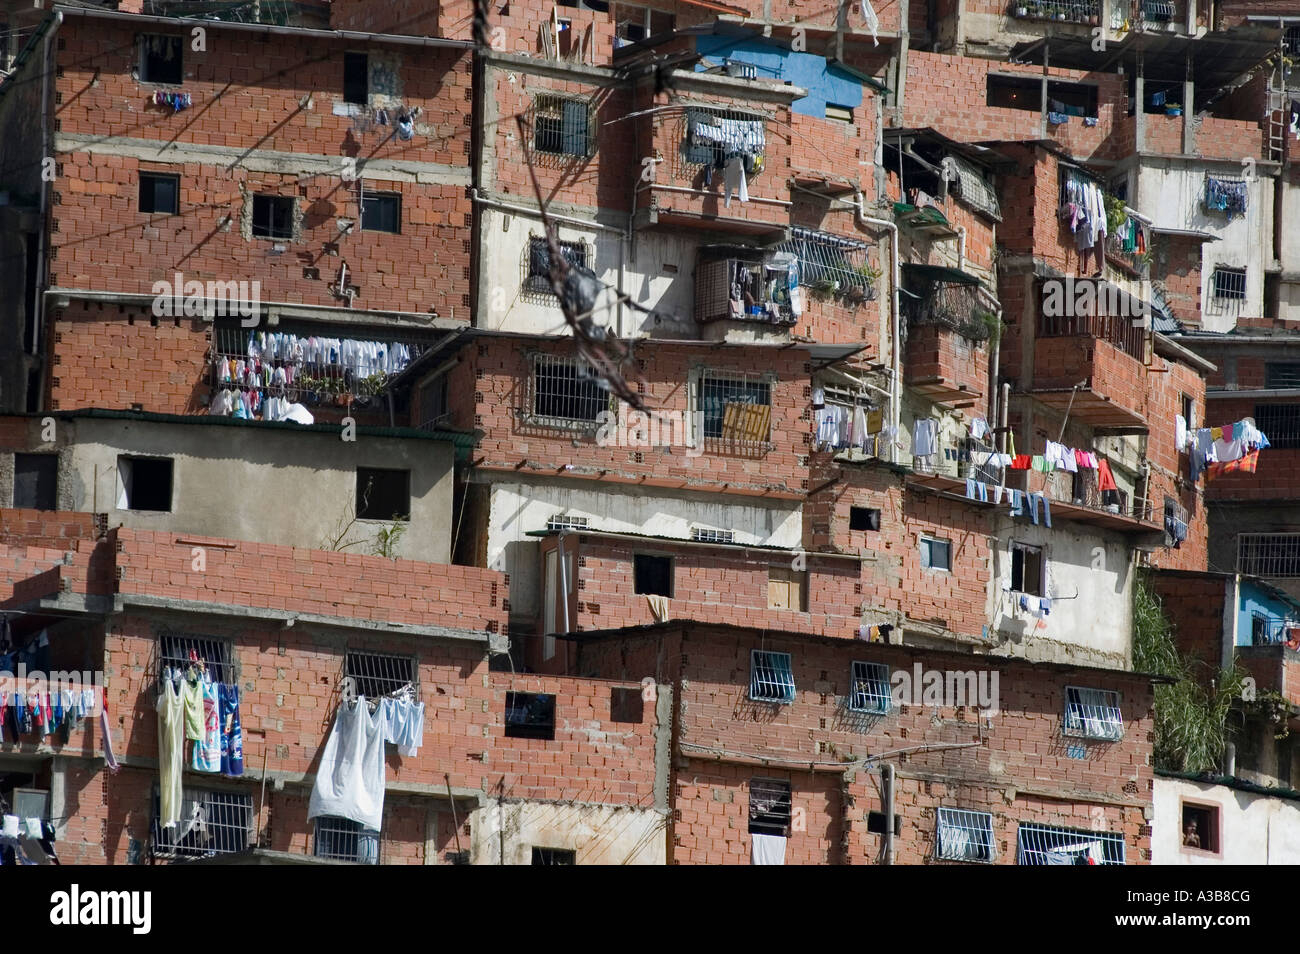 VENEZUELA South America Caracas Typical low income slum dwellings in the Petare district of capital clinging to the side of hill Stock Photo